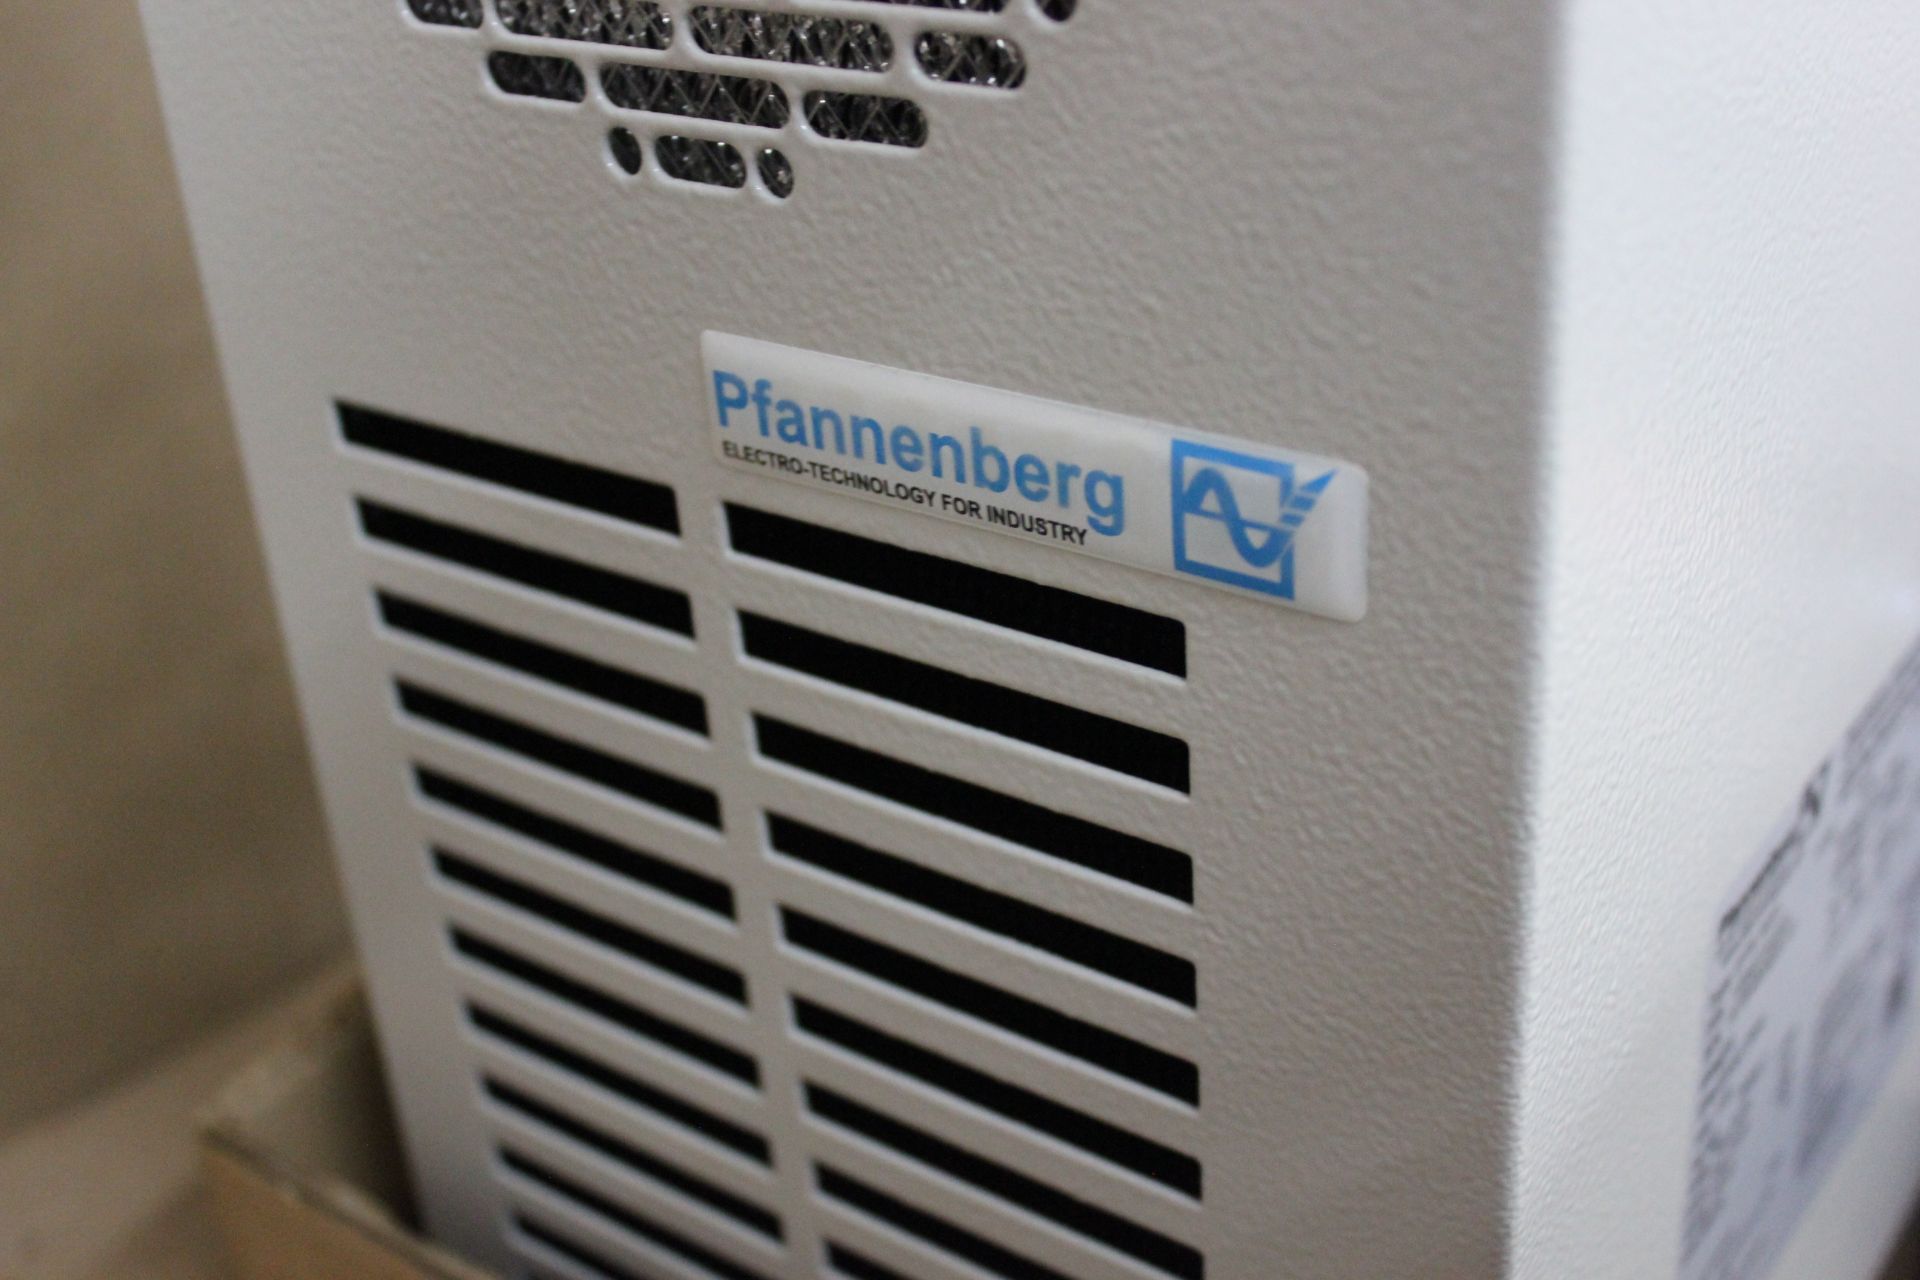 NEW PFANNENBERG SIDE MOUNT COOLING UNIT - Image 6 of 7